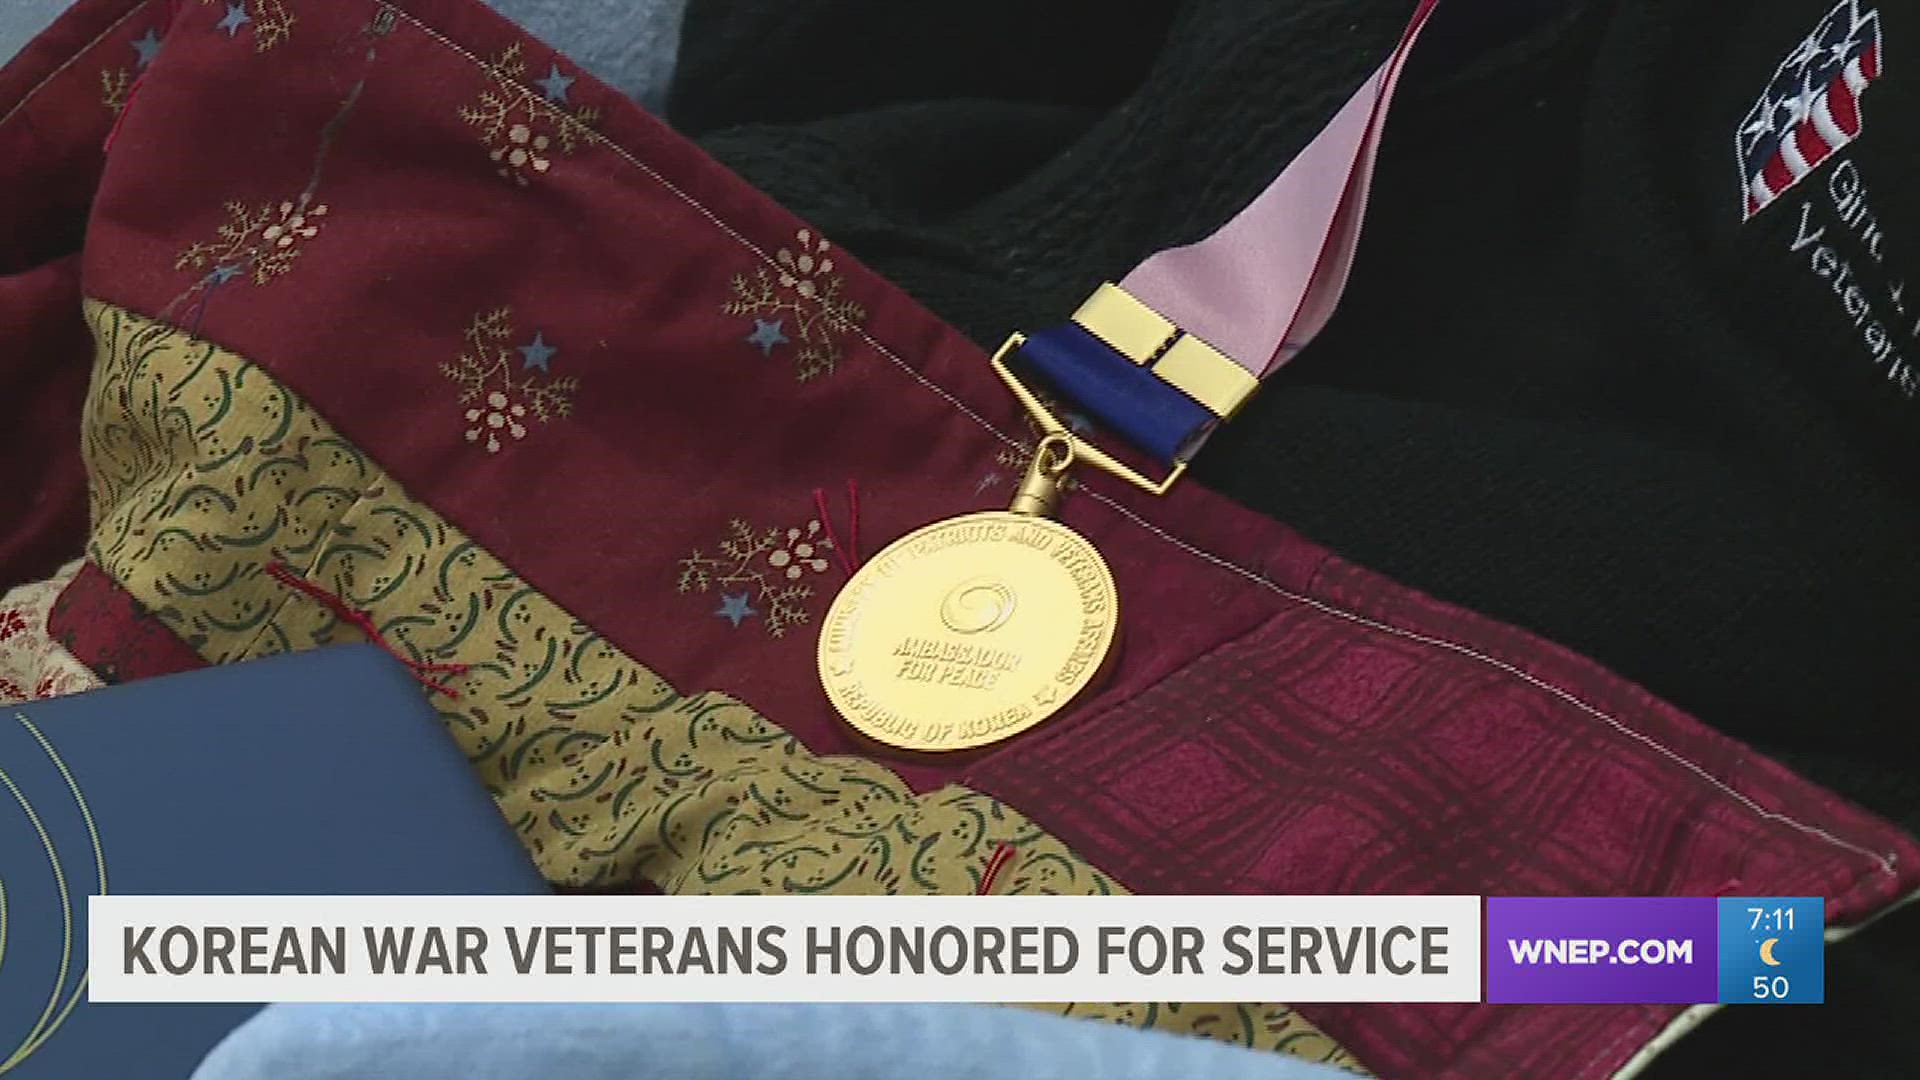 Medals were given to local vets who served in the Korean War.